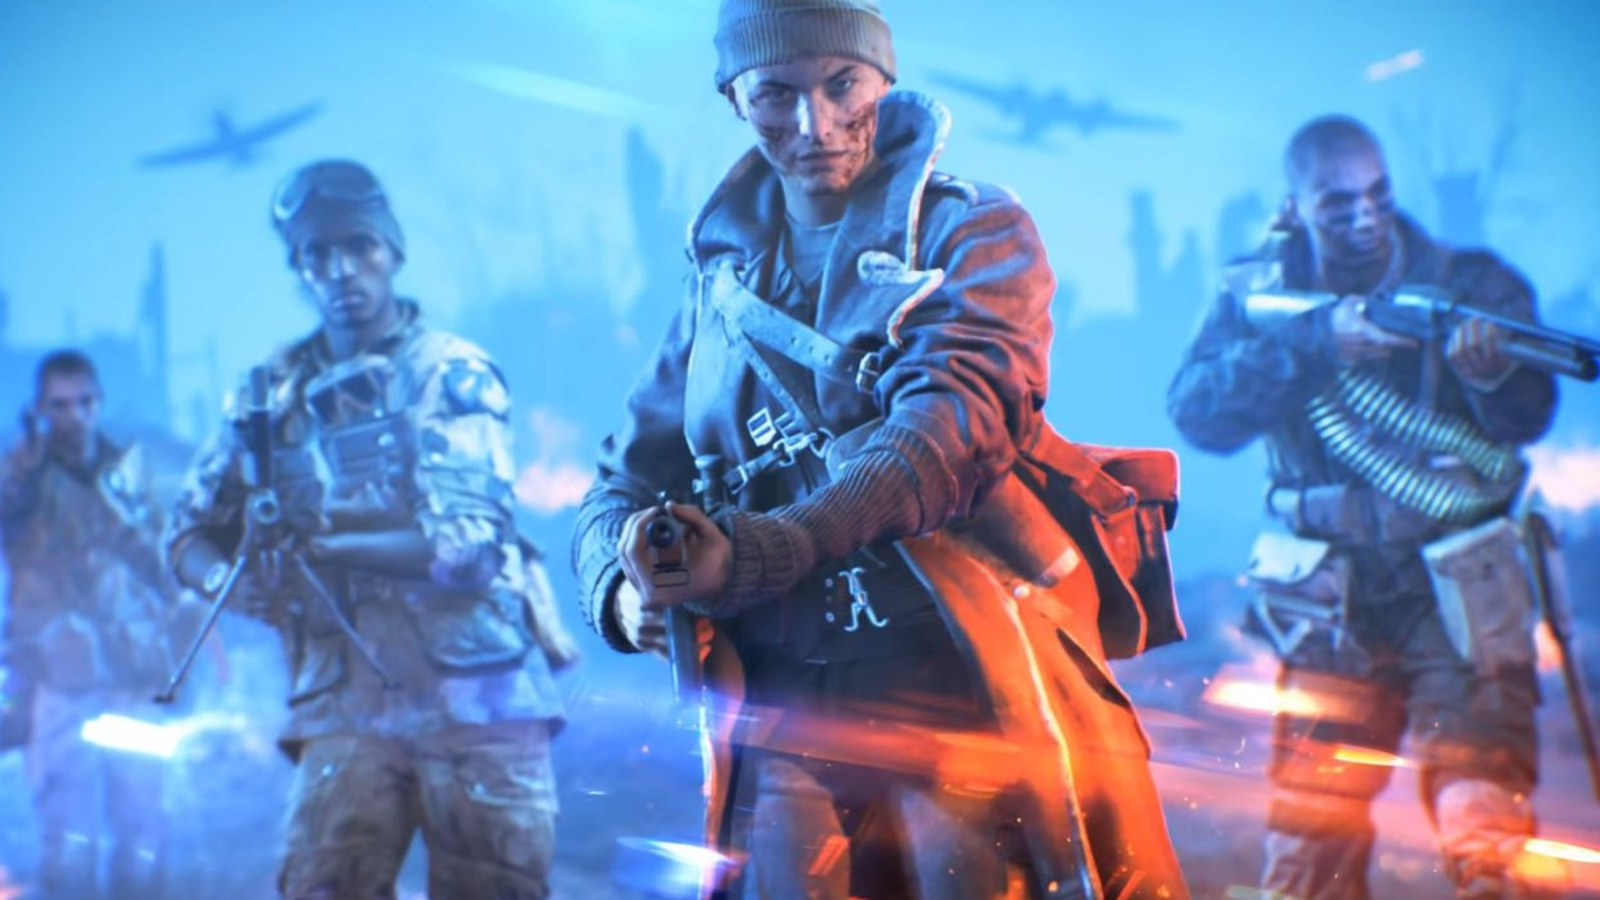 Battlefield V: Welcome to the War! 